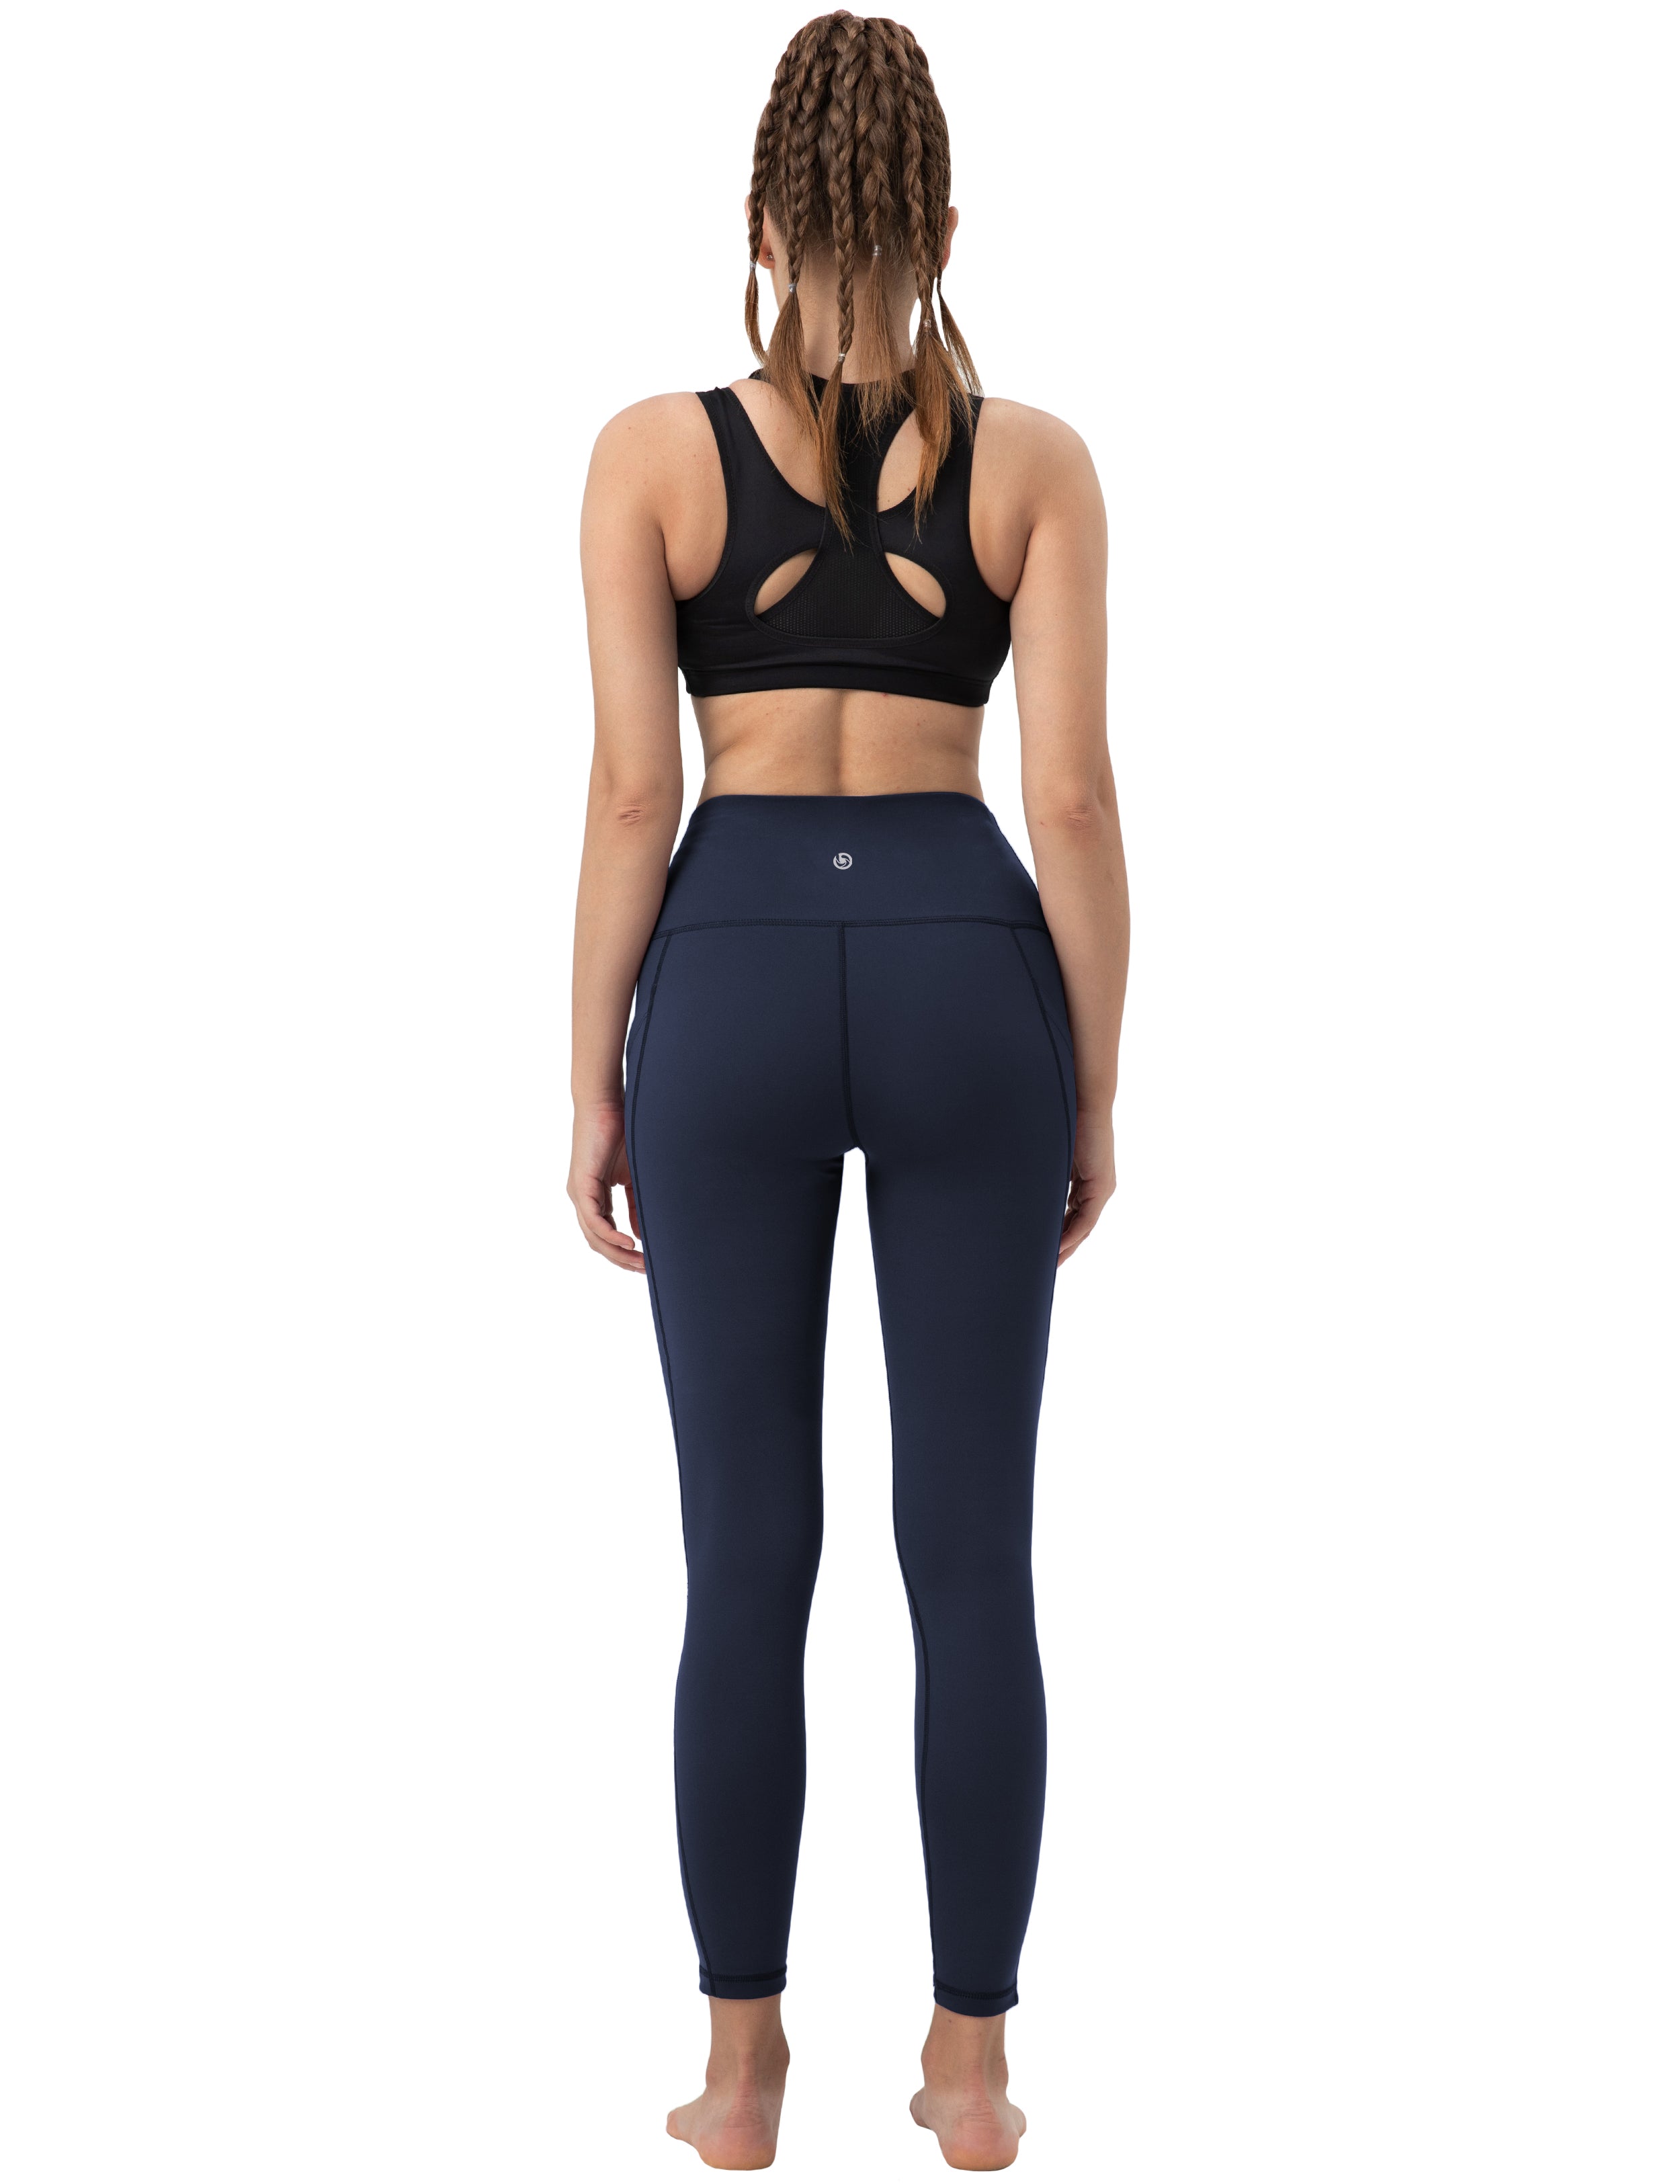 High Waist Side Pockets Yoga Pants darknavy 75% Nylon, 25% Spandex Fabric doesn't attract lint easily 4-way stretch No see-through Moisture-wicking Tummy control Inner pocket